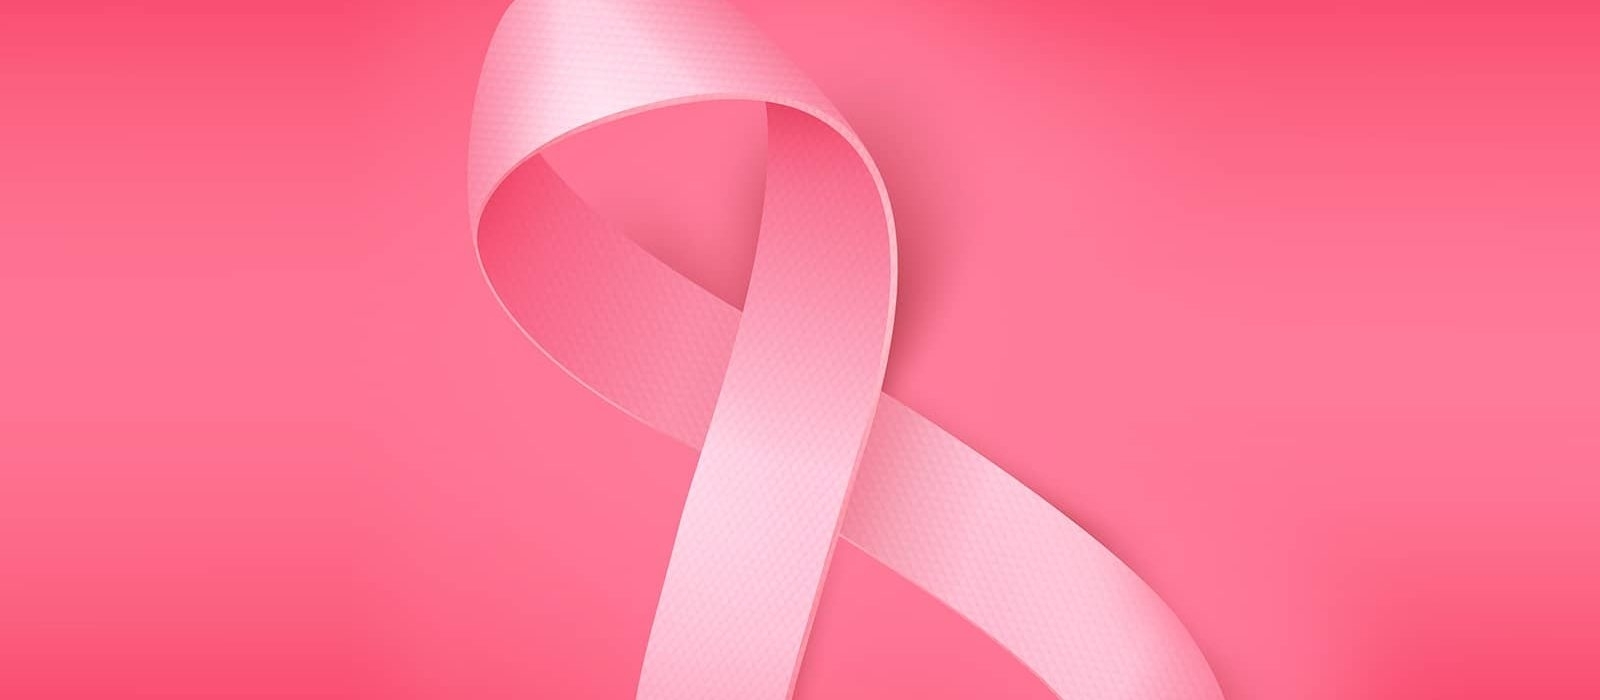 thumbnails Breast Cancer Awareness 2019: What Everyone Should Know #ThinkPink